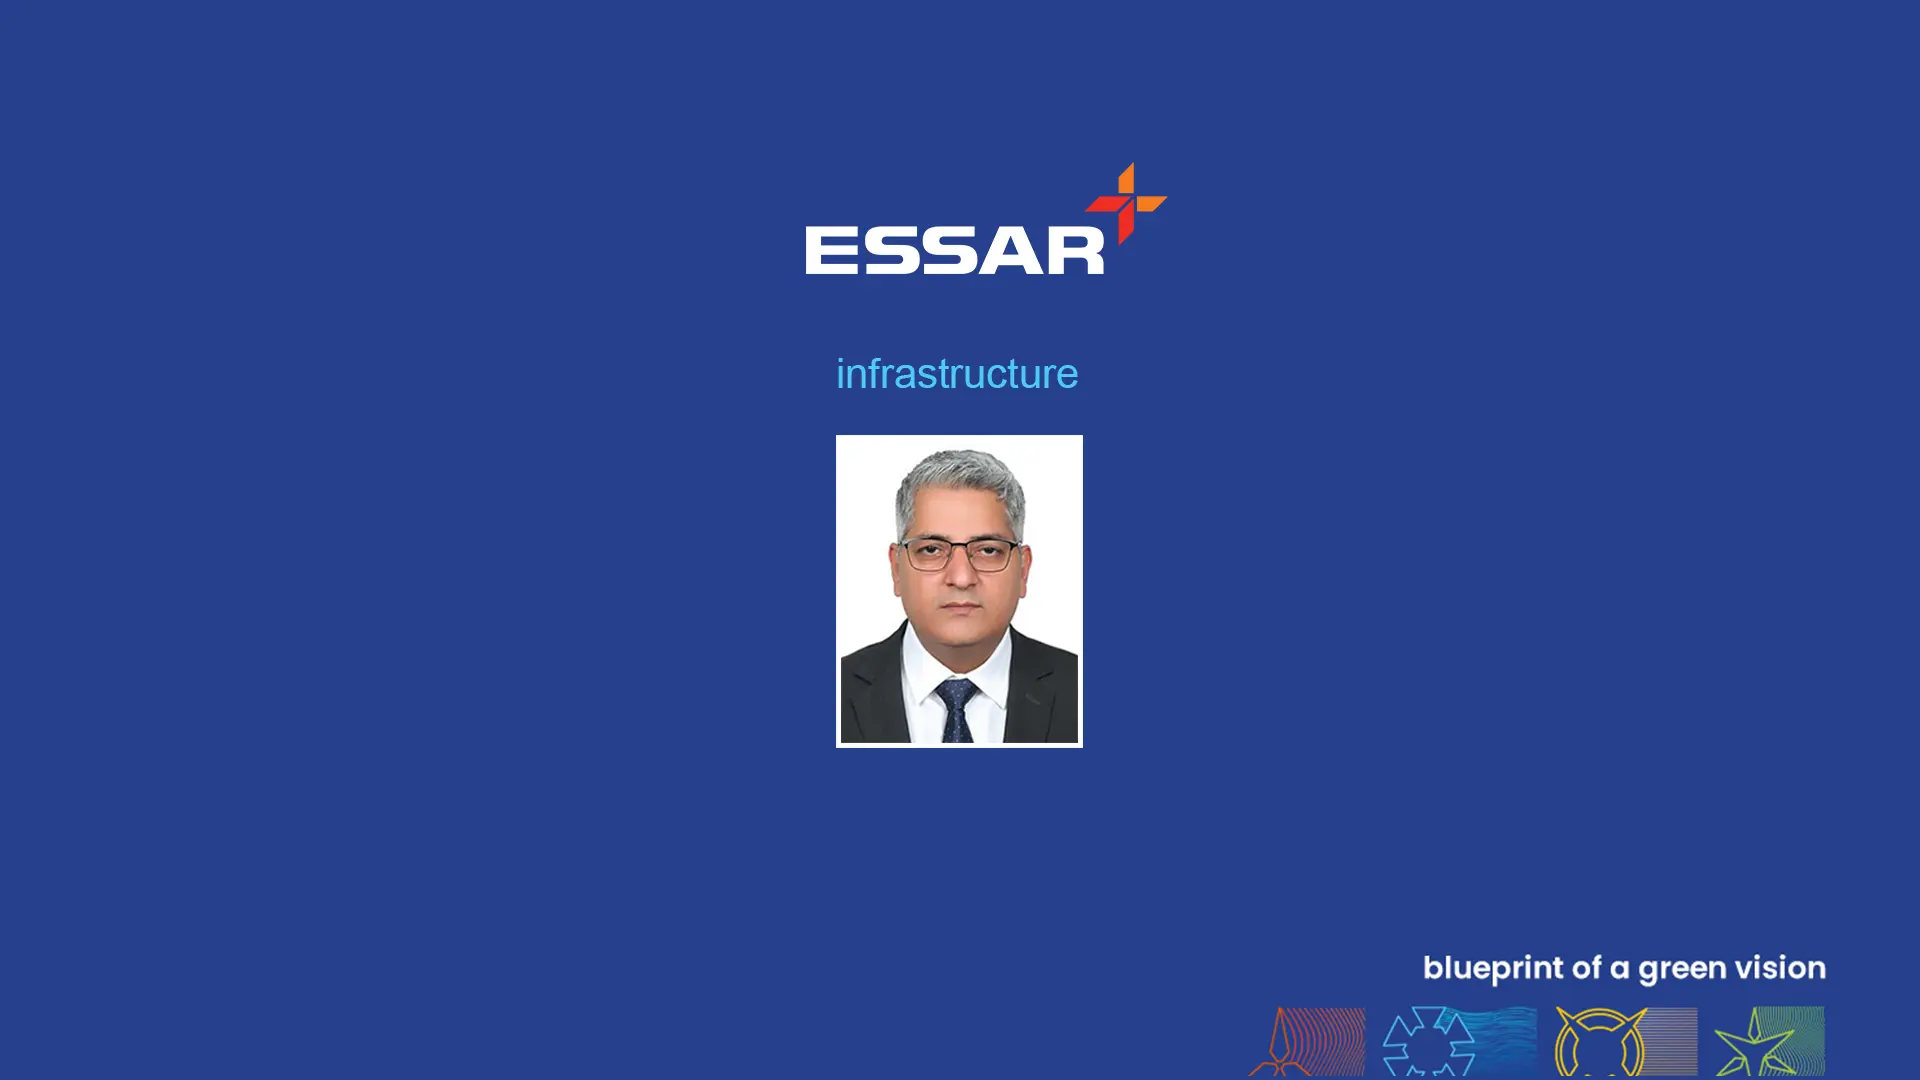 Ankur Kumar appointed as Chief Executive Officer of Essar Power’s Renewables Division